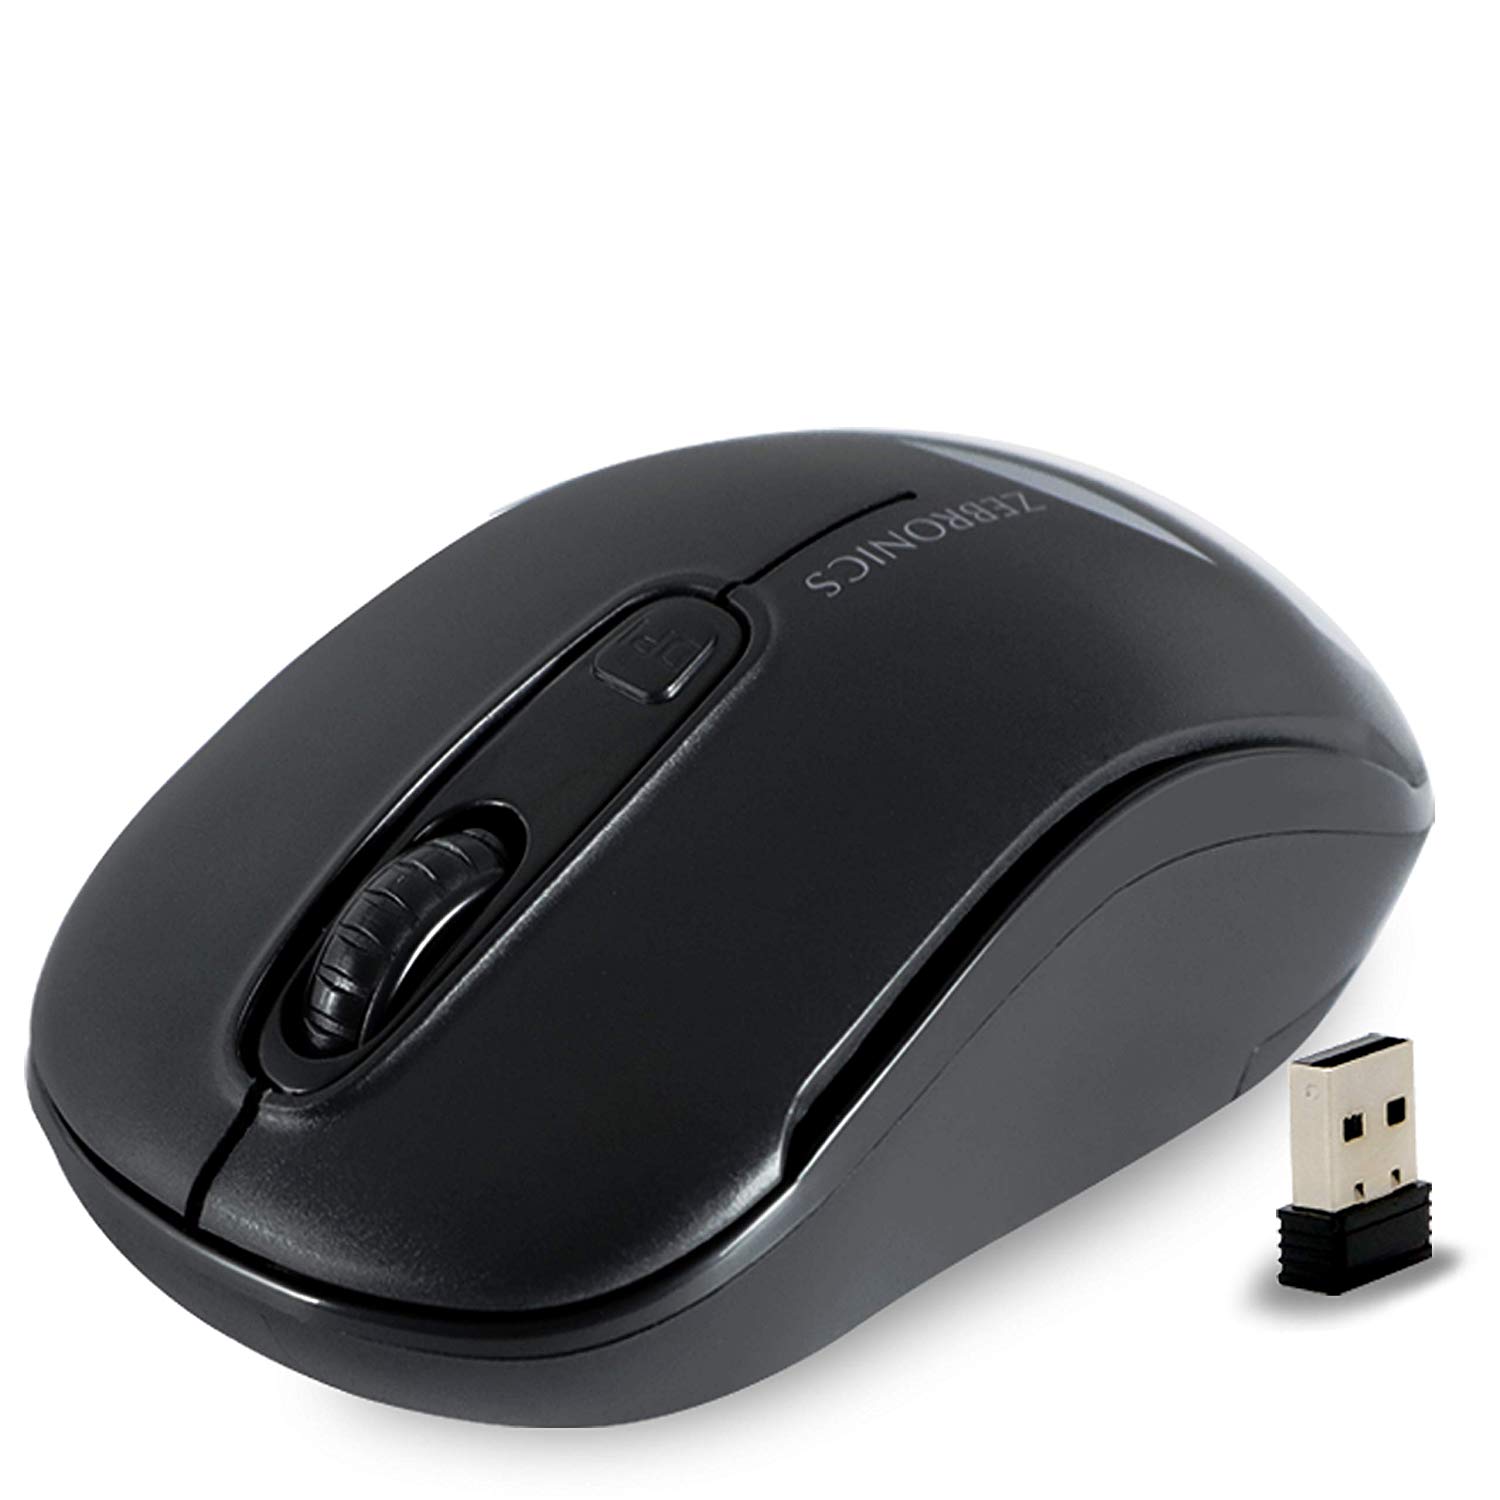 Top 5 Wireless Mouse in India 2020